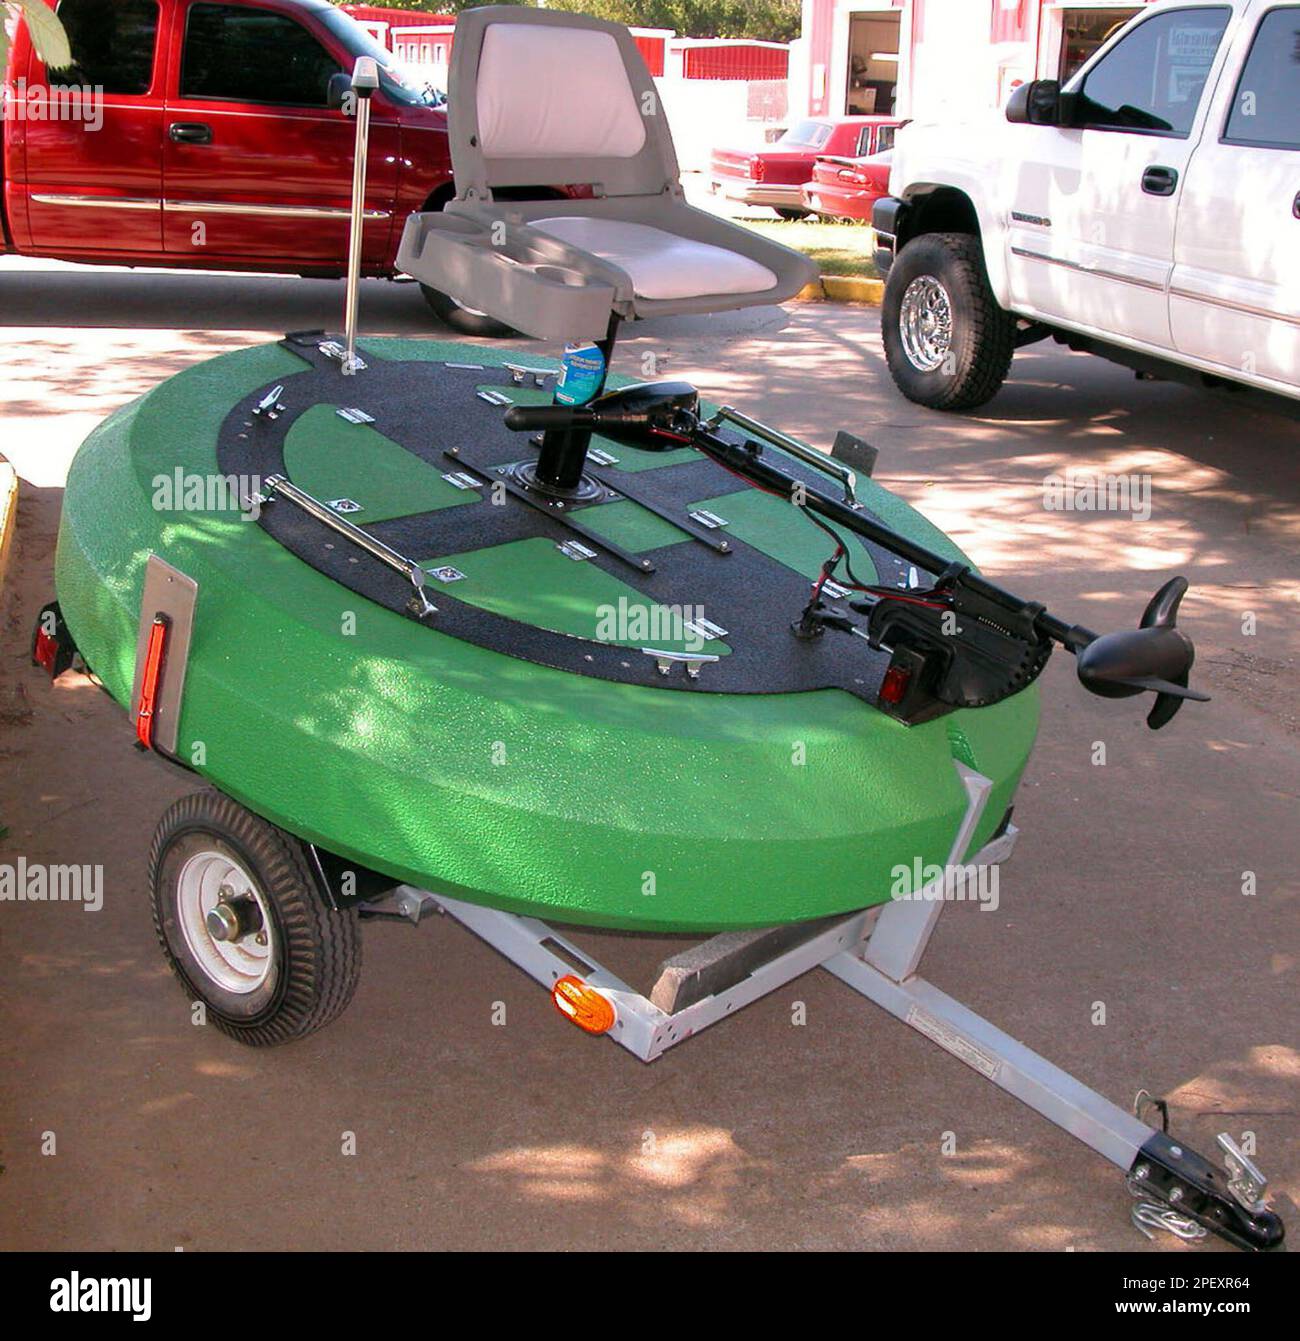 https://c8.alamy.com/comp/2PEXR64/advance-for-weekend-june-12-13-a-lilipad-boat-a-one-man-boat-shaped-like-a-lily-pad-and-trailer-invented-by-dean-north-mark-childress-and-rod-howard-is-shown-june-1-2004-in-coweta-okla-the-one-man-boat-is-built-for-the-fisherman-who-loves-to-fish-but-whose-living-accommodation-doesnt-allow-him-the-luxury-of-keeping-a-bass-boat-ap-phototulsa-worldpaul-tackett-2PEXR64.jpg